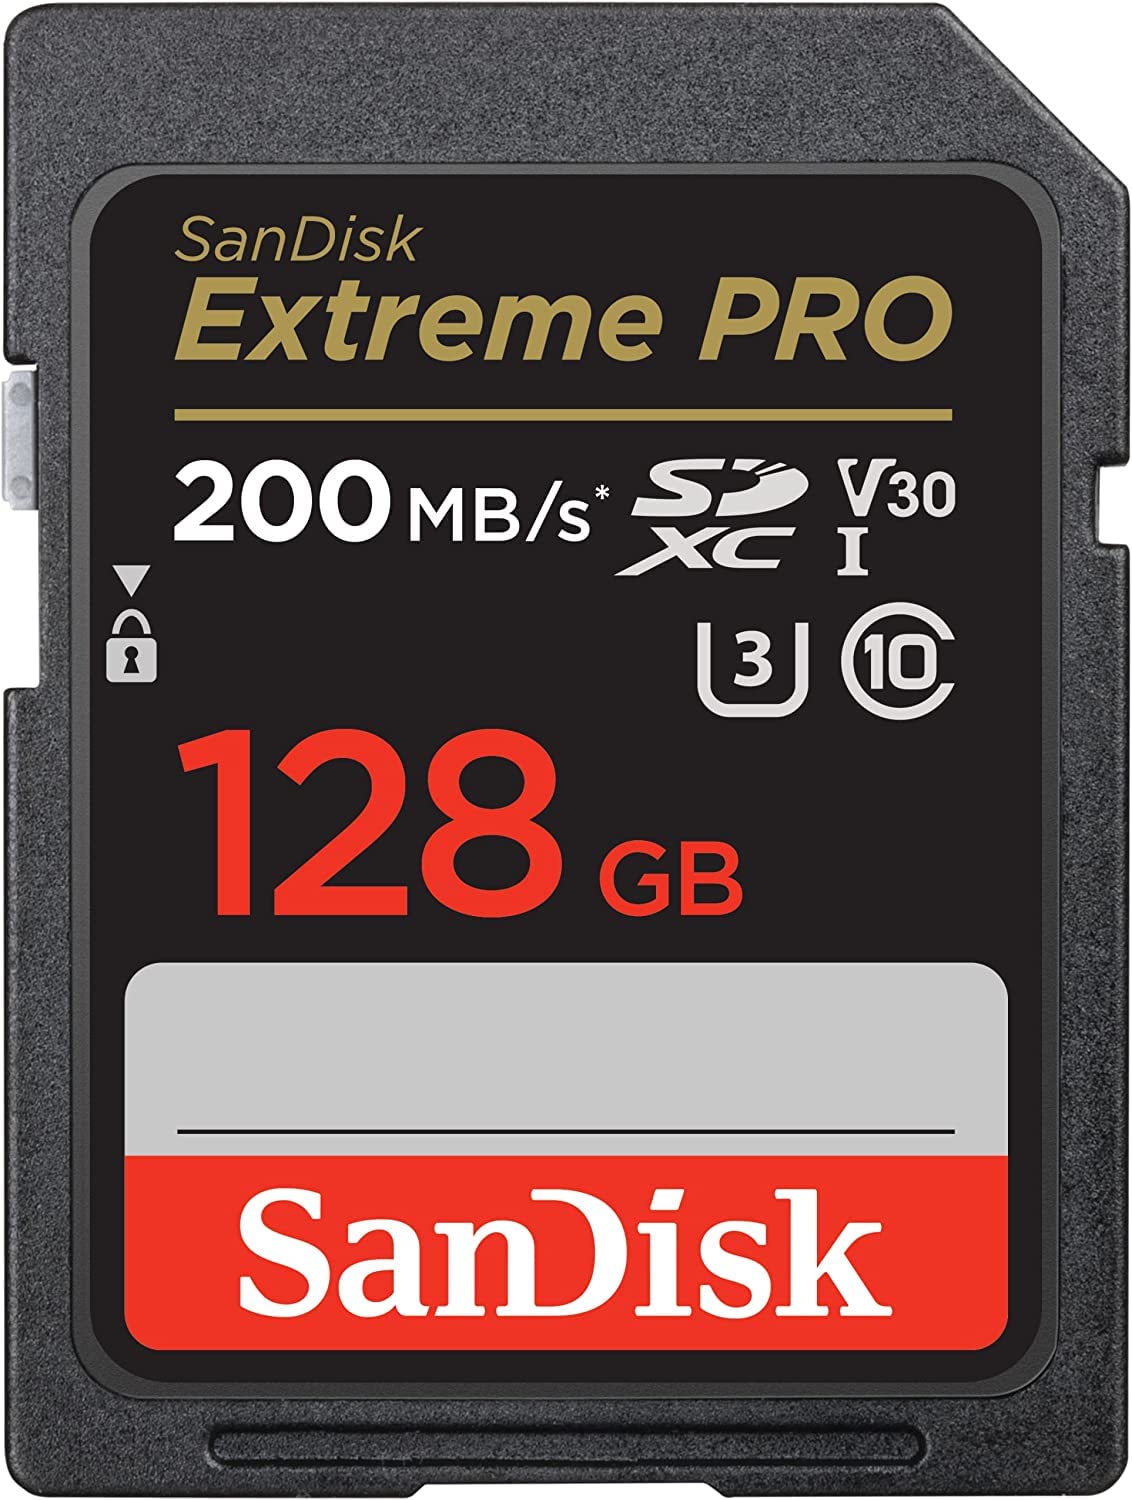 SanDisk Extreme Pro 128GB SDXC Card for Canon Camera Compatible with EOS M50 Mark II, EOS Ra Class 10 UHS-1 (SDSDXXD-128G-GN4IN) Bundle with (1) Everything But Stromboli MicroSDXC & SD Card Reader